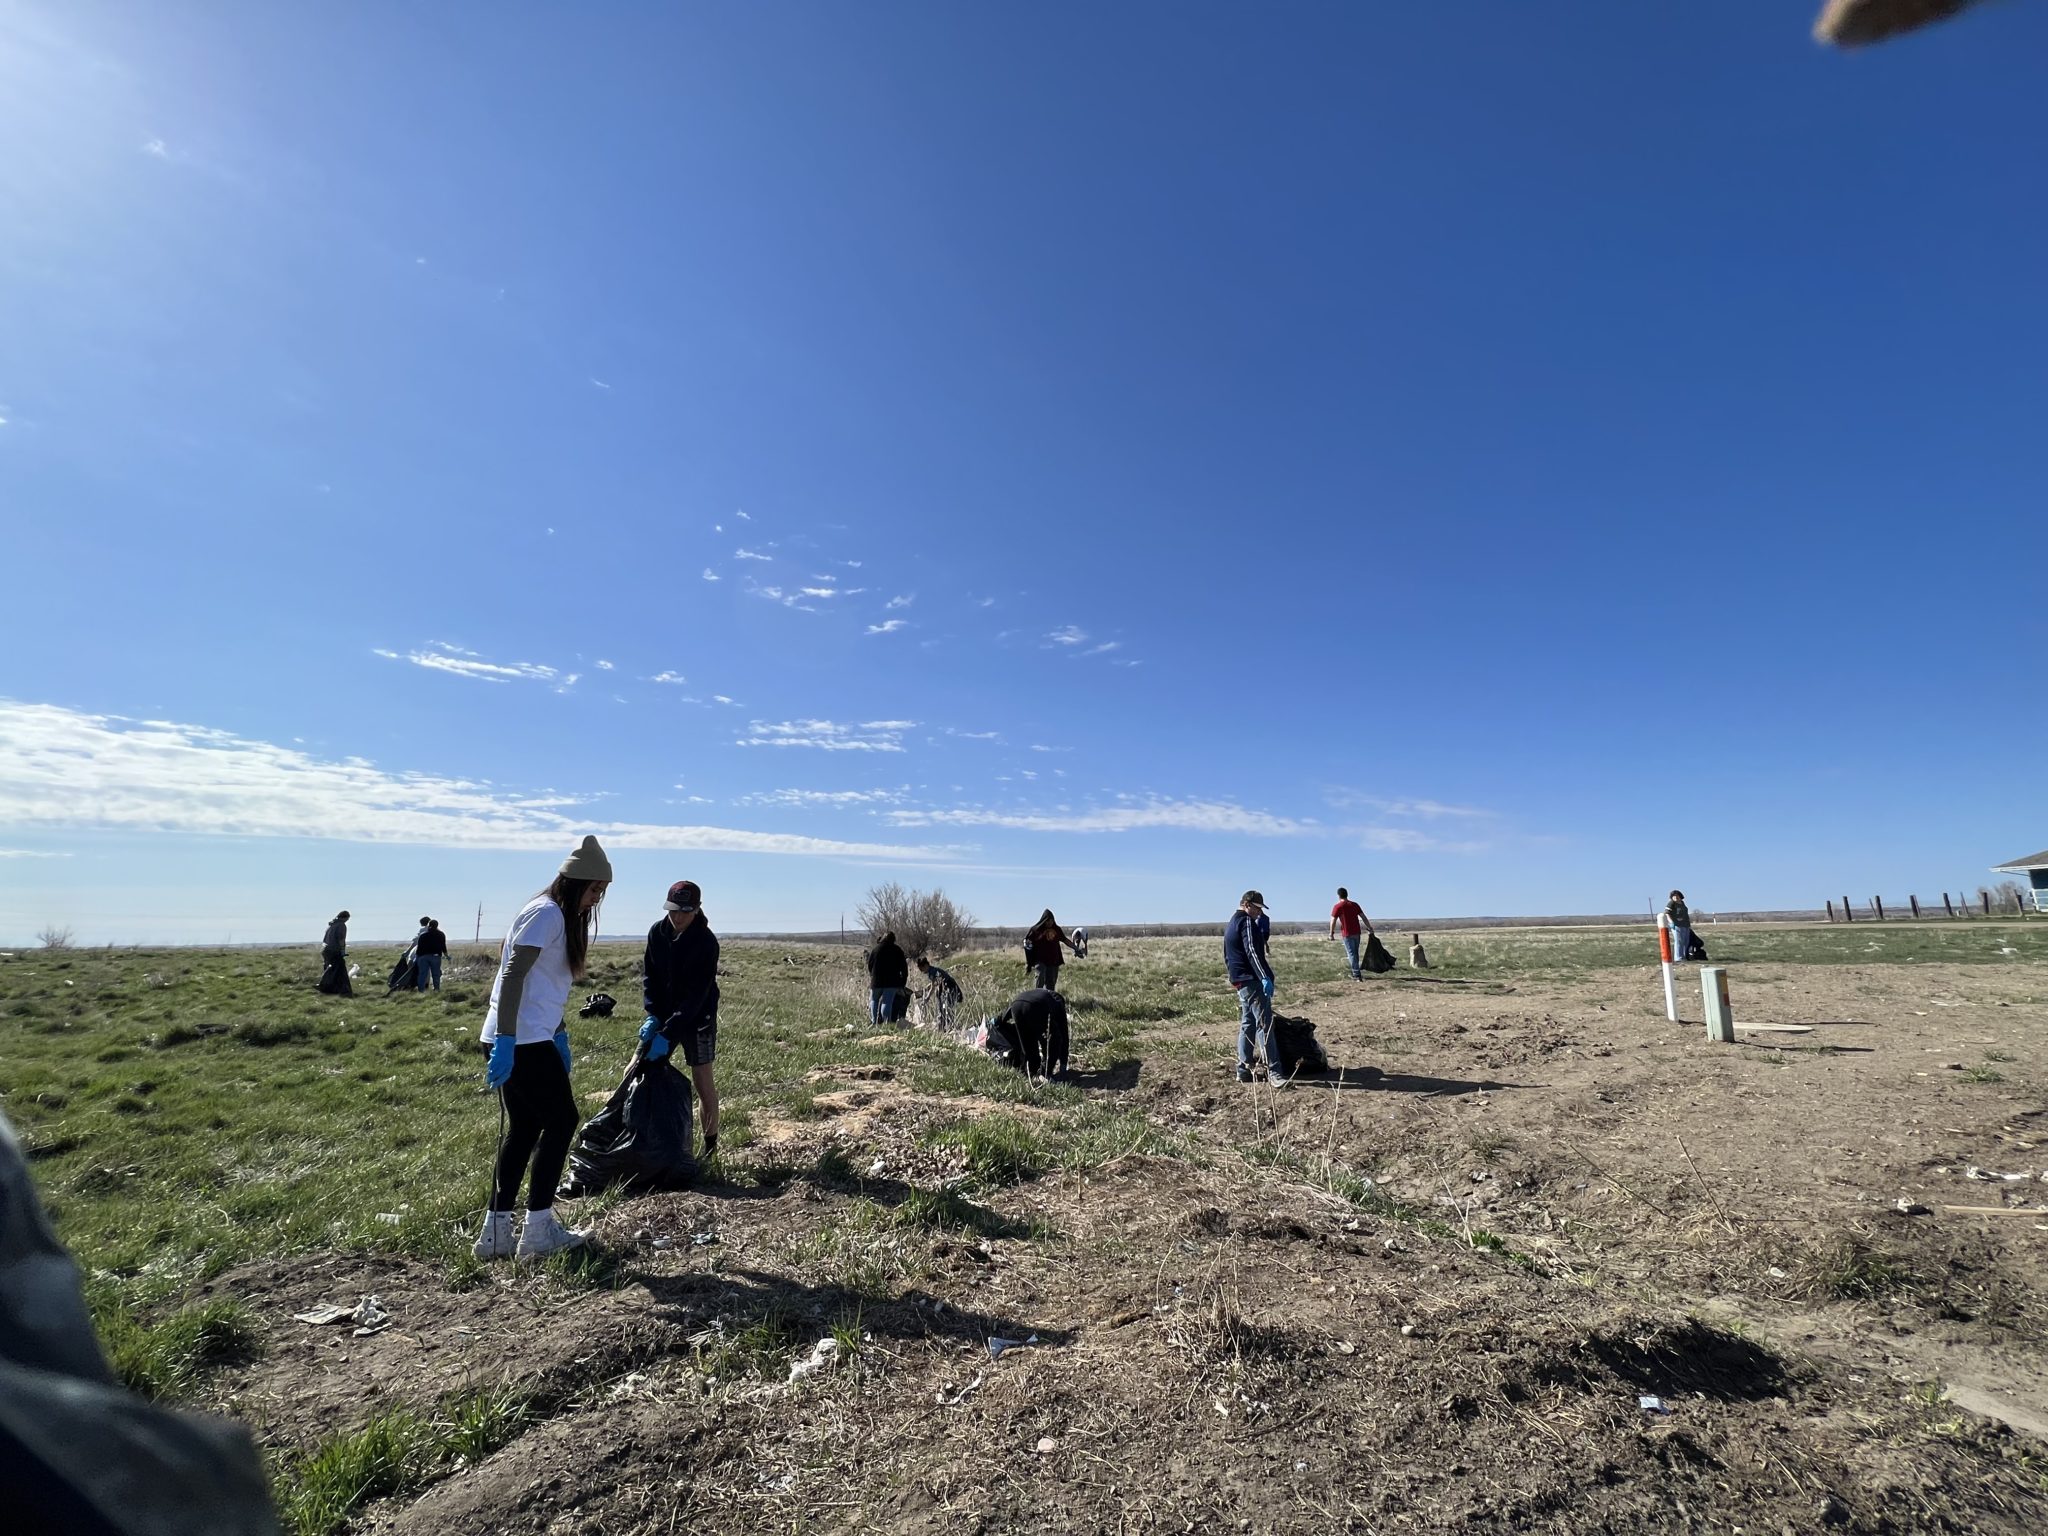 Nine individuals walking around an open field. They are placing trash into large black bags.